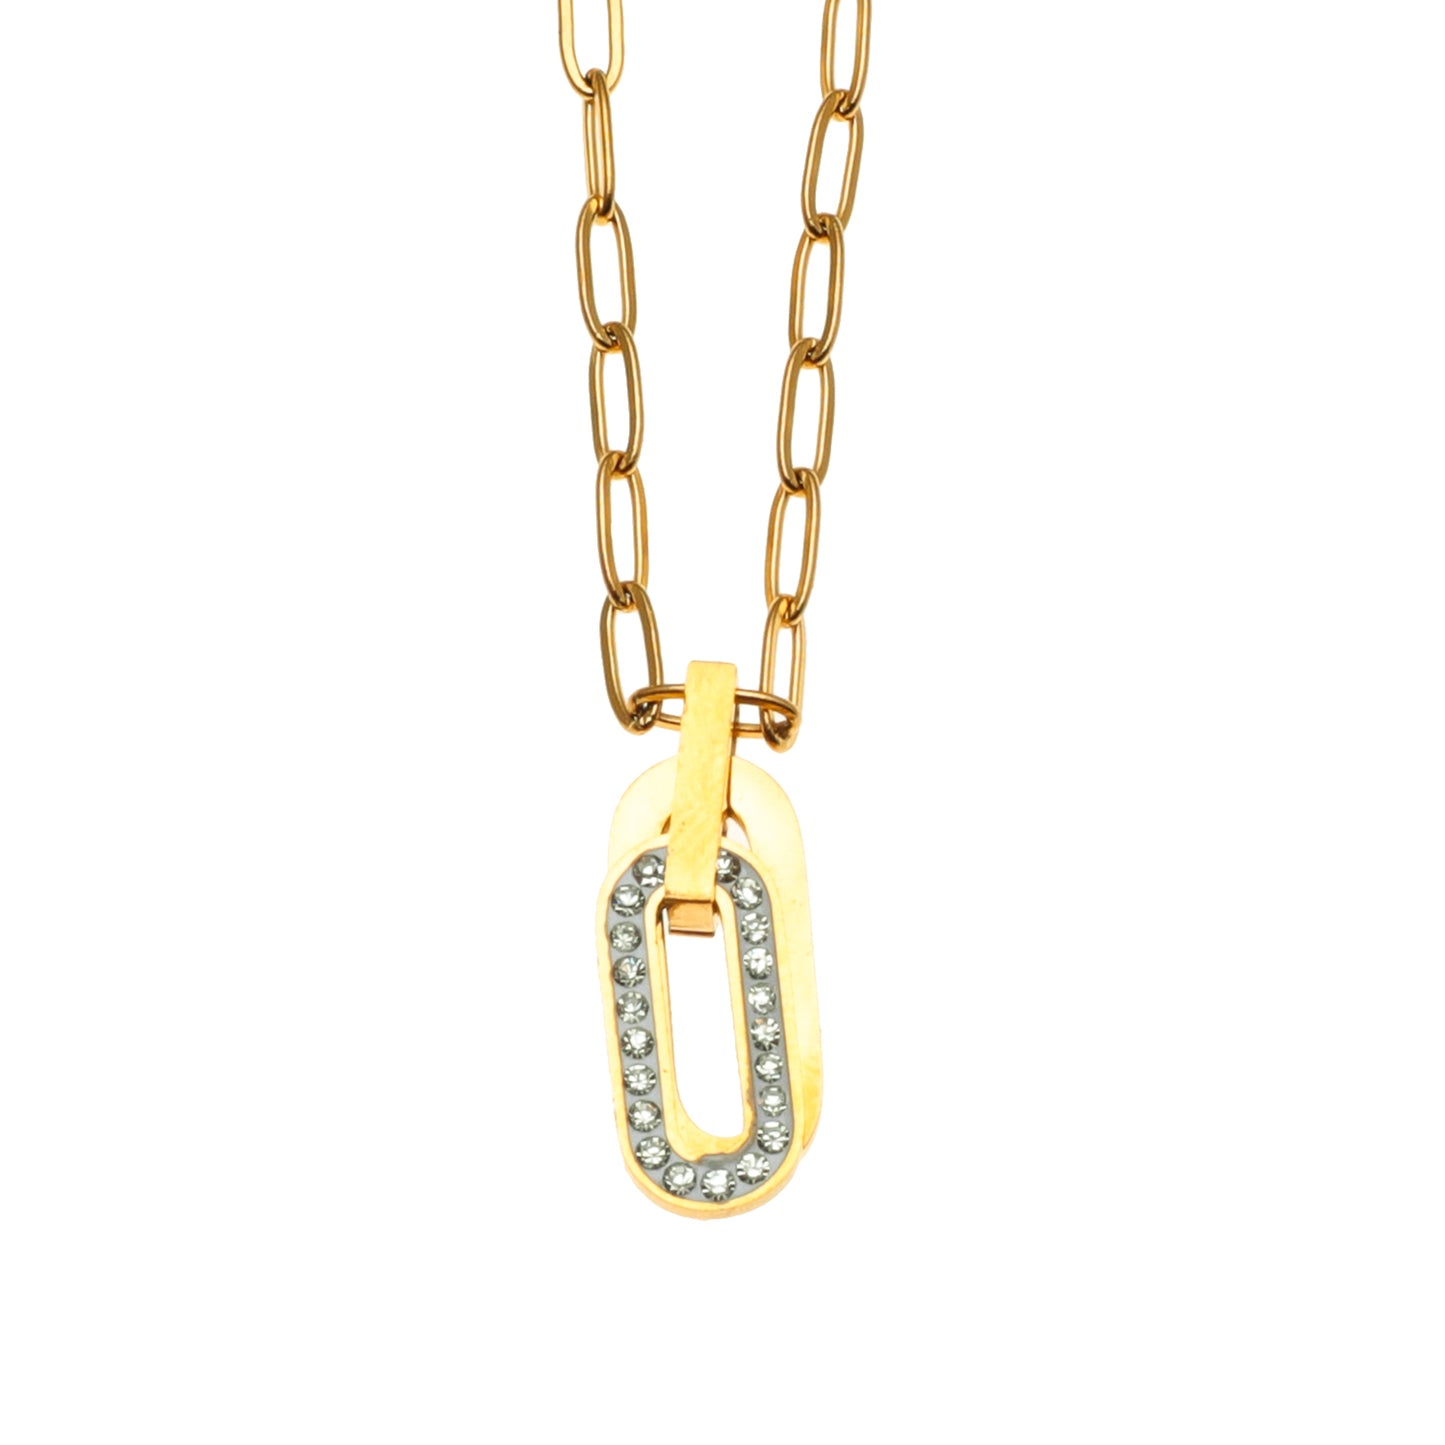 Style CHICALA 33164: Zirconia-Embedded Oval Shaped Charms Pendant on Paper-Clip Chain Necklace.